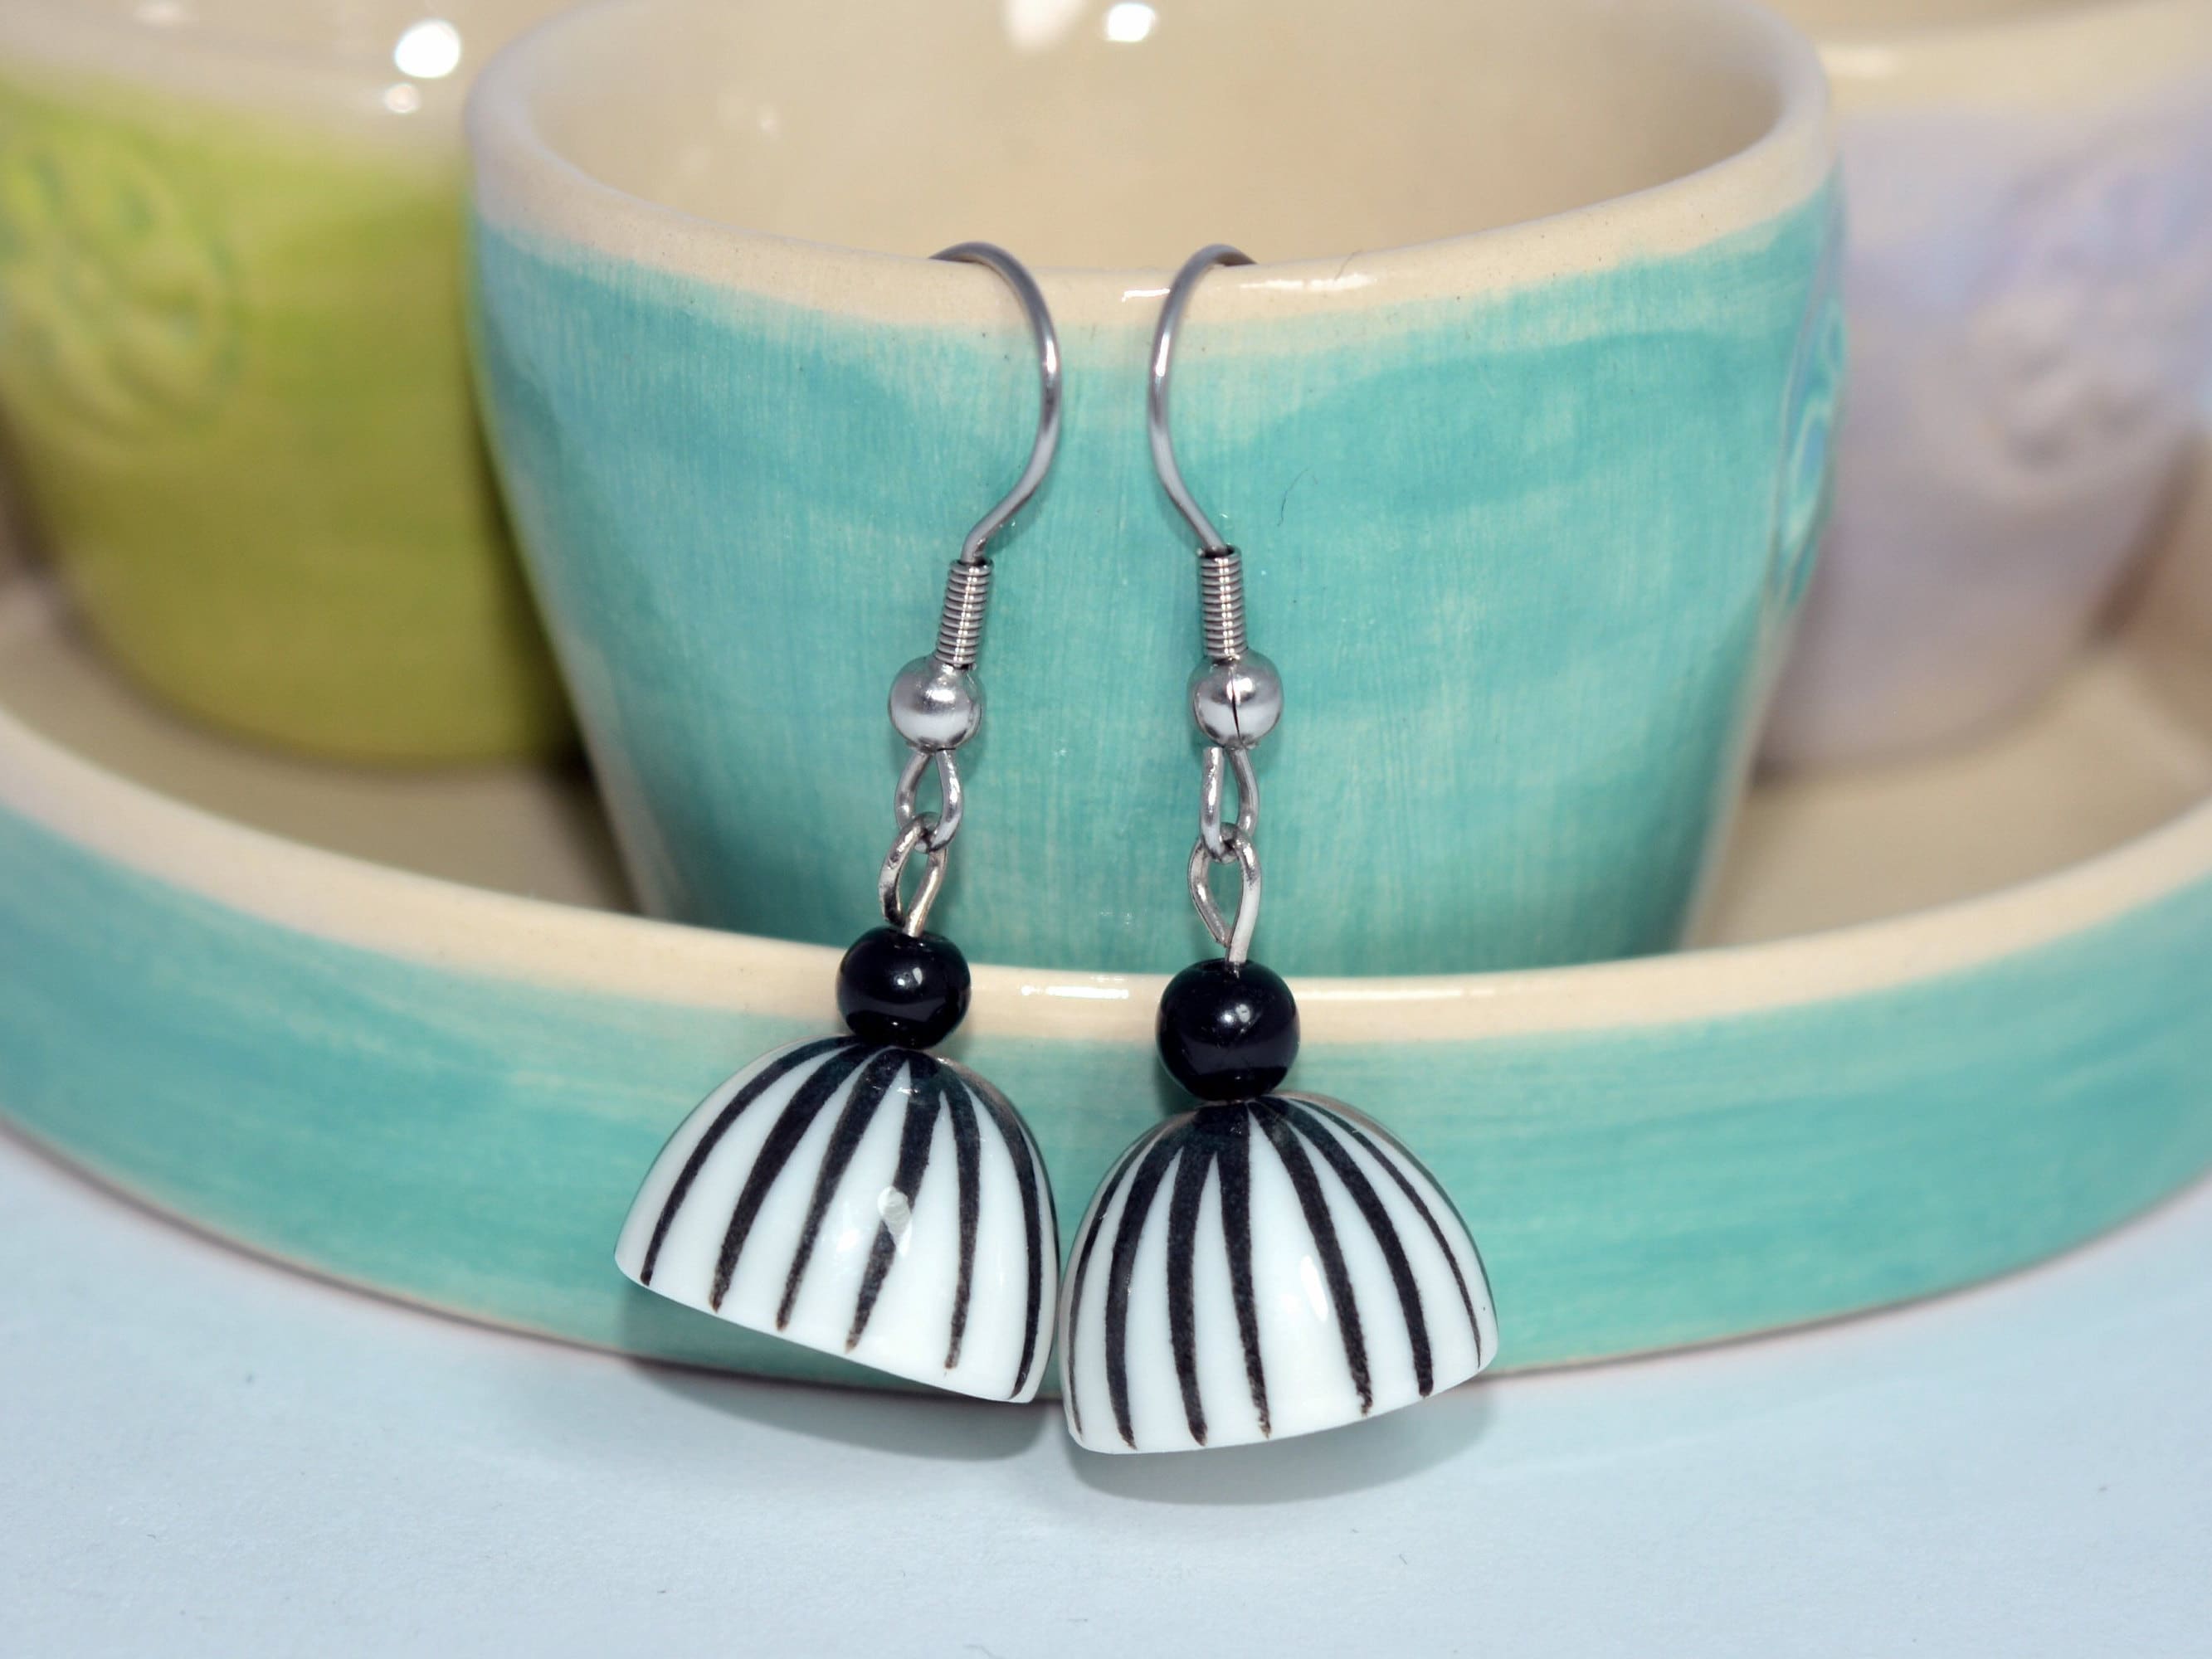 ceramic earrings Porcelain earrings hand painted light weight black and white surgical steel wire gift for her elegant handmade